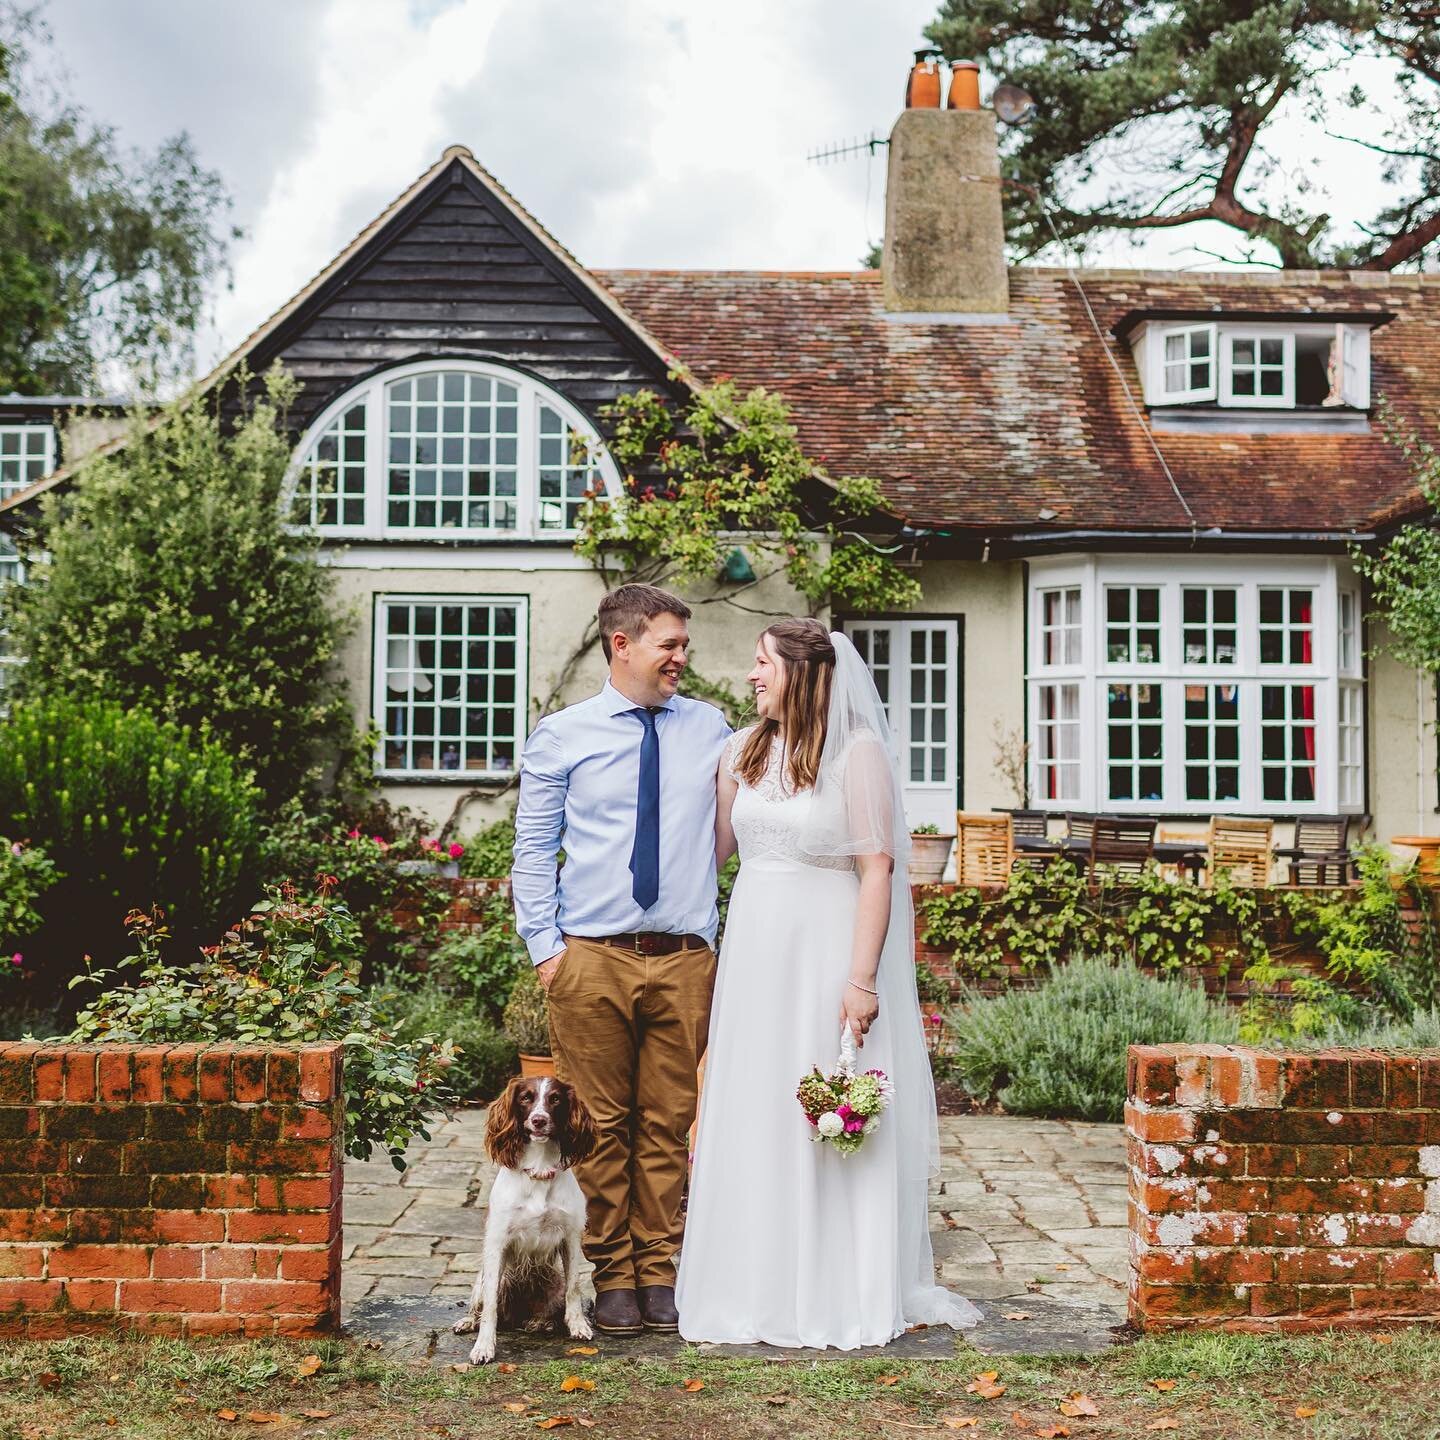 Real, homemade, relaxed weddings&hellip;&hellip;this is what I crave💗Becca and Steve&rsquo;s wedding day last year was exactly that. 

They had hired a stunning house in Aldeburgh, a short walk away from the beach, and with a garden big enough to ho